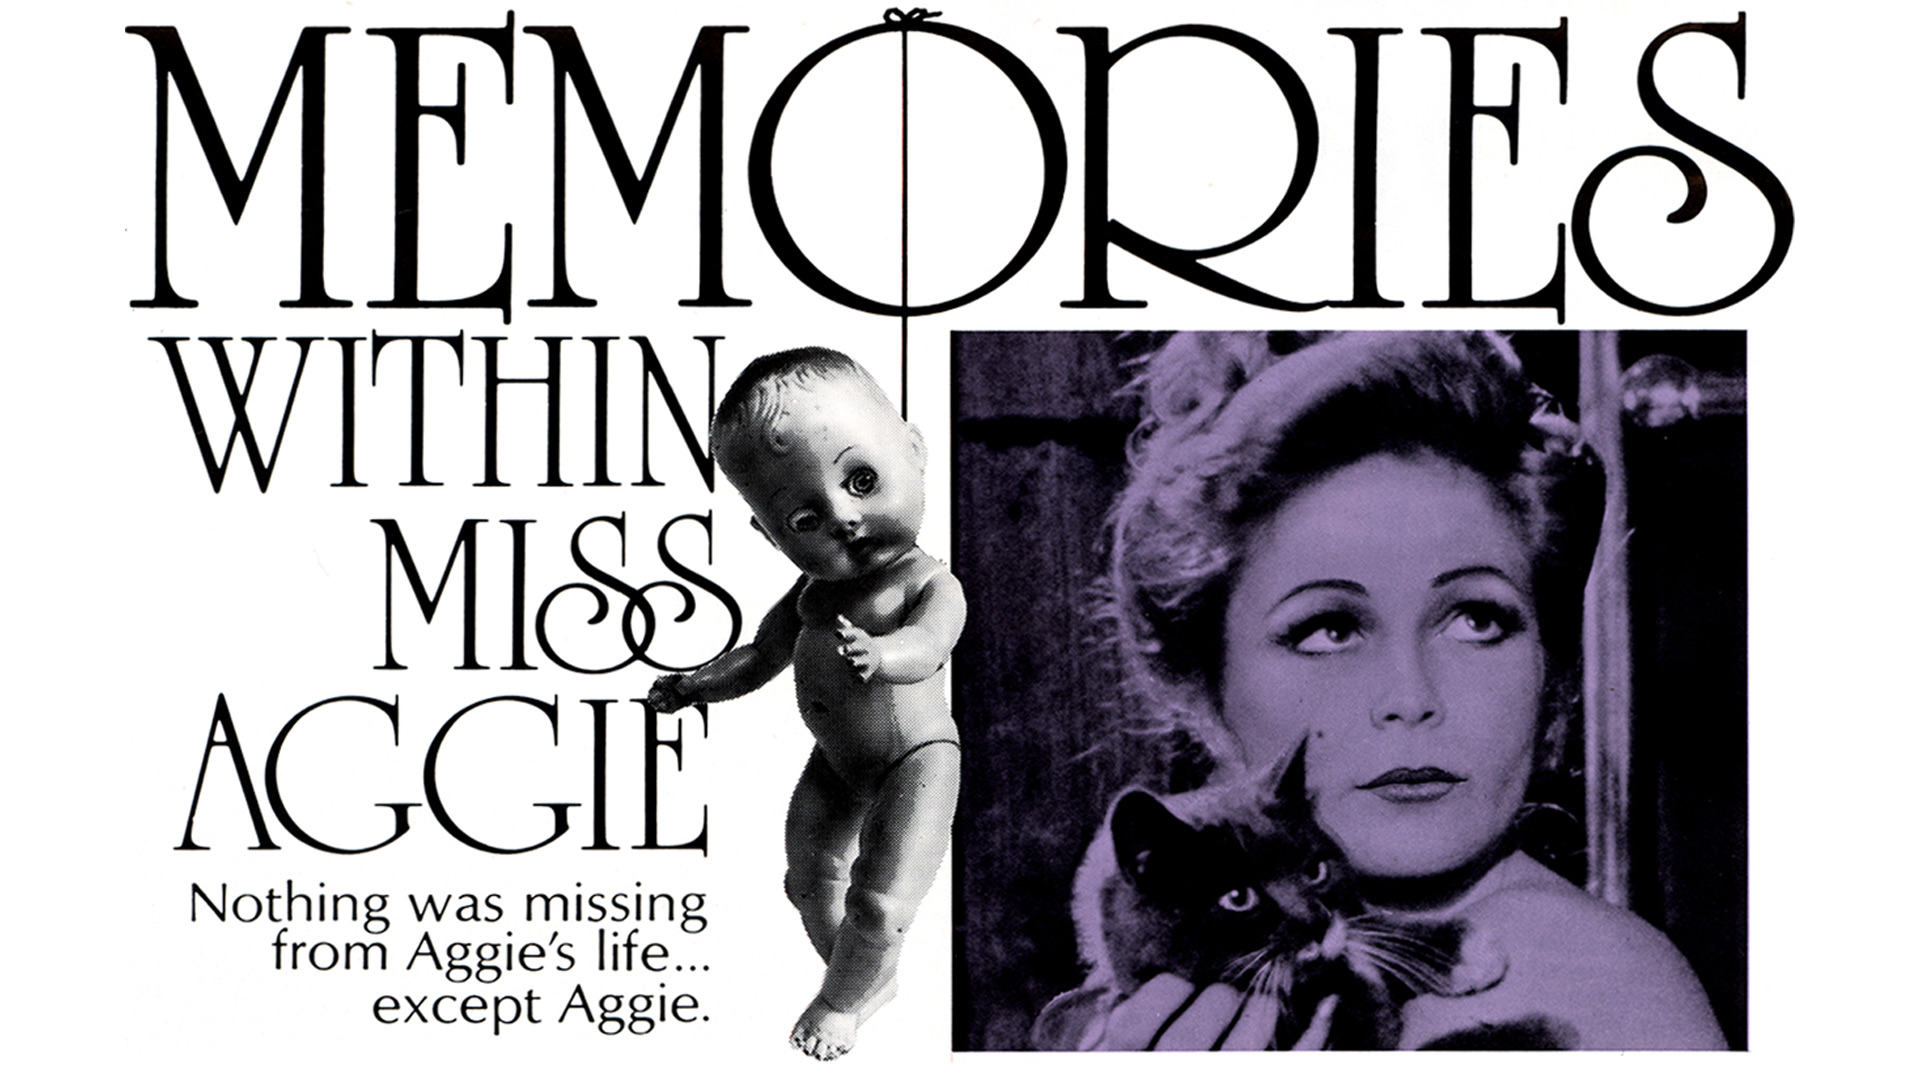 billboard ad for film 'Memories Within Miss Aggie'